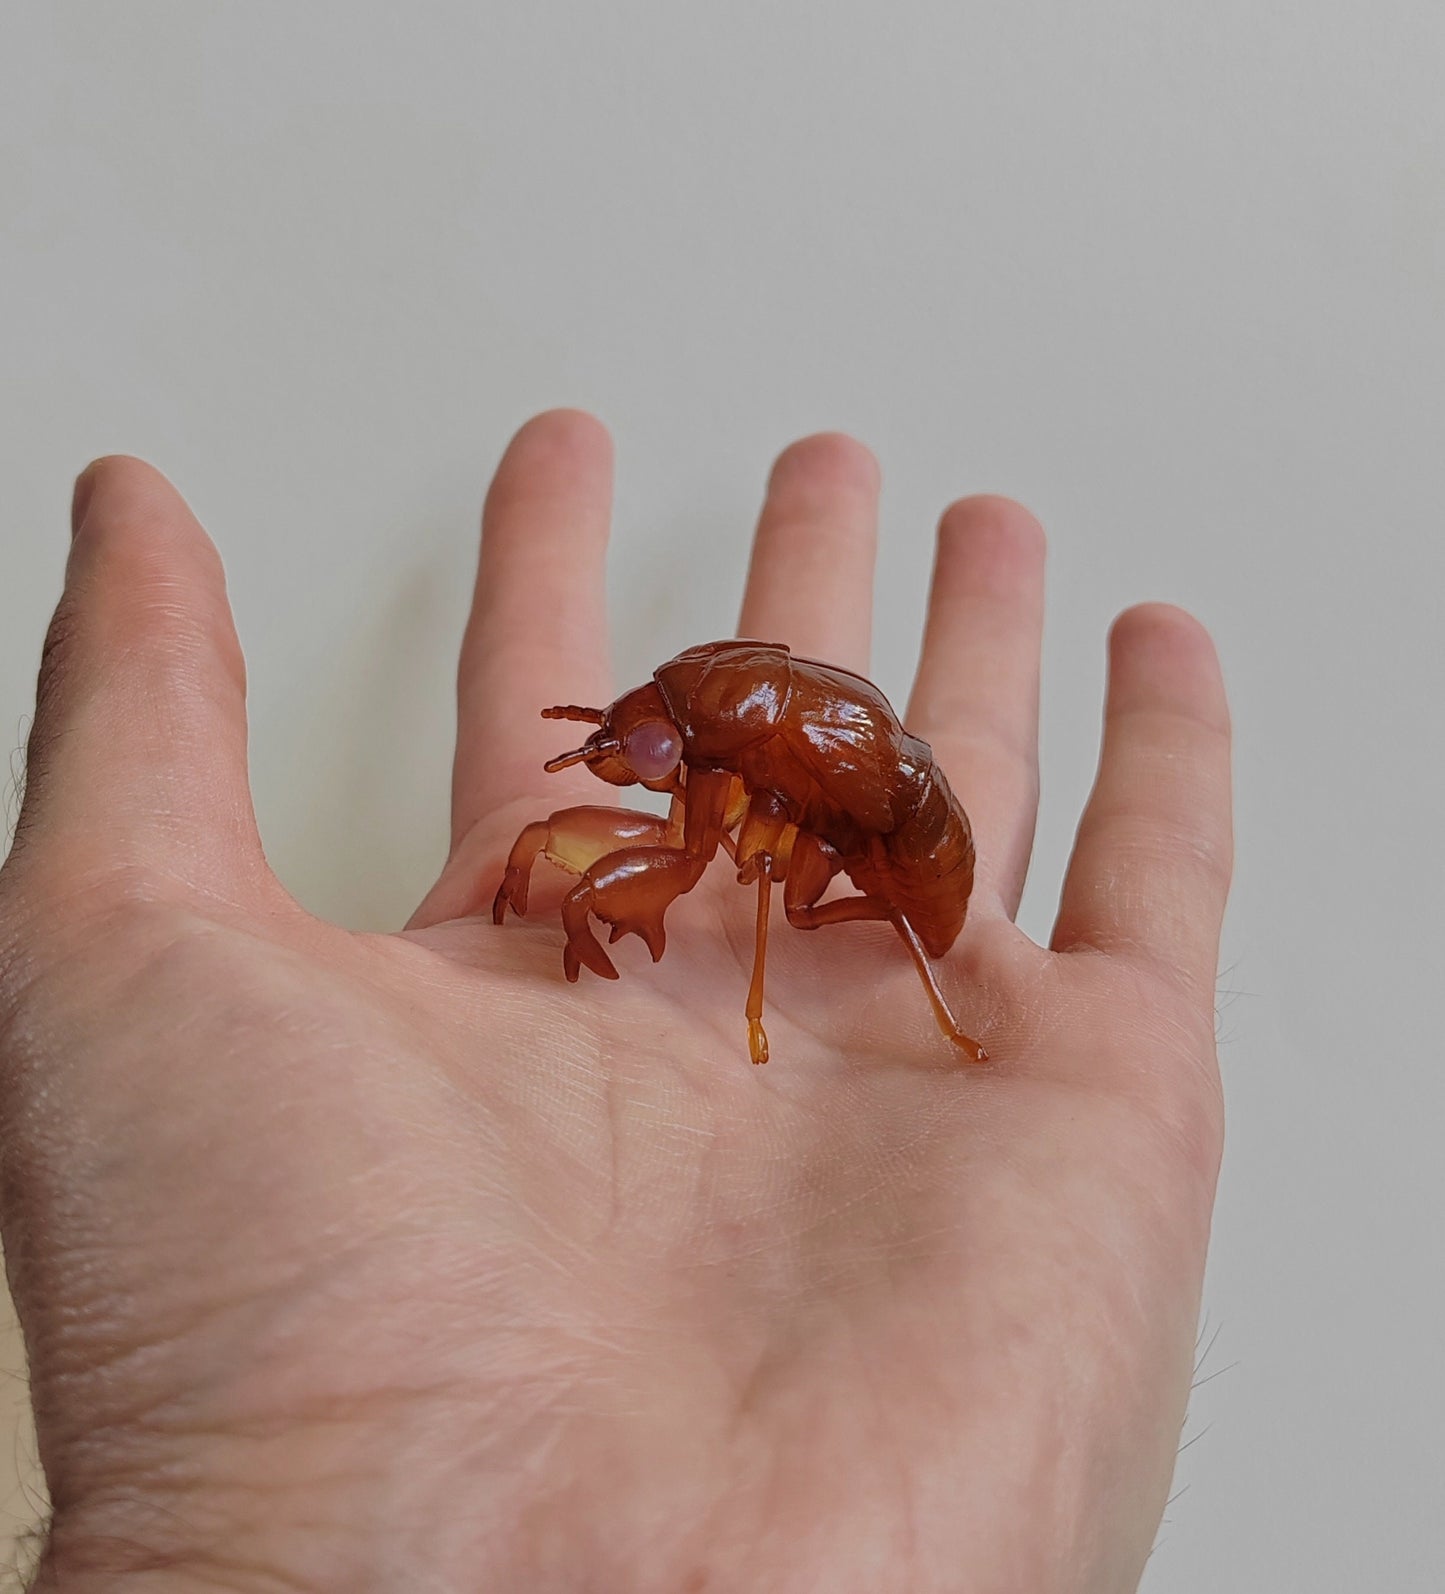 Insect models from the Ichiban Kuji series (rare!)